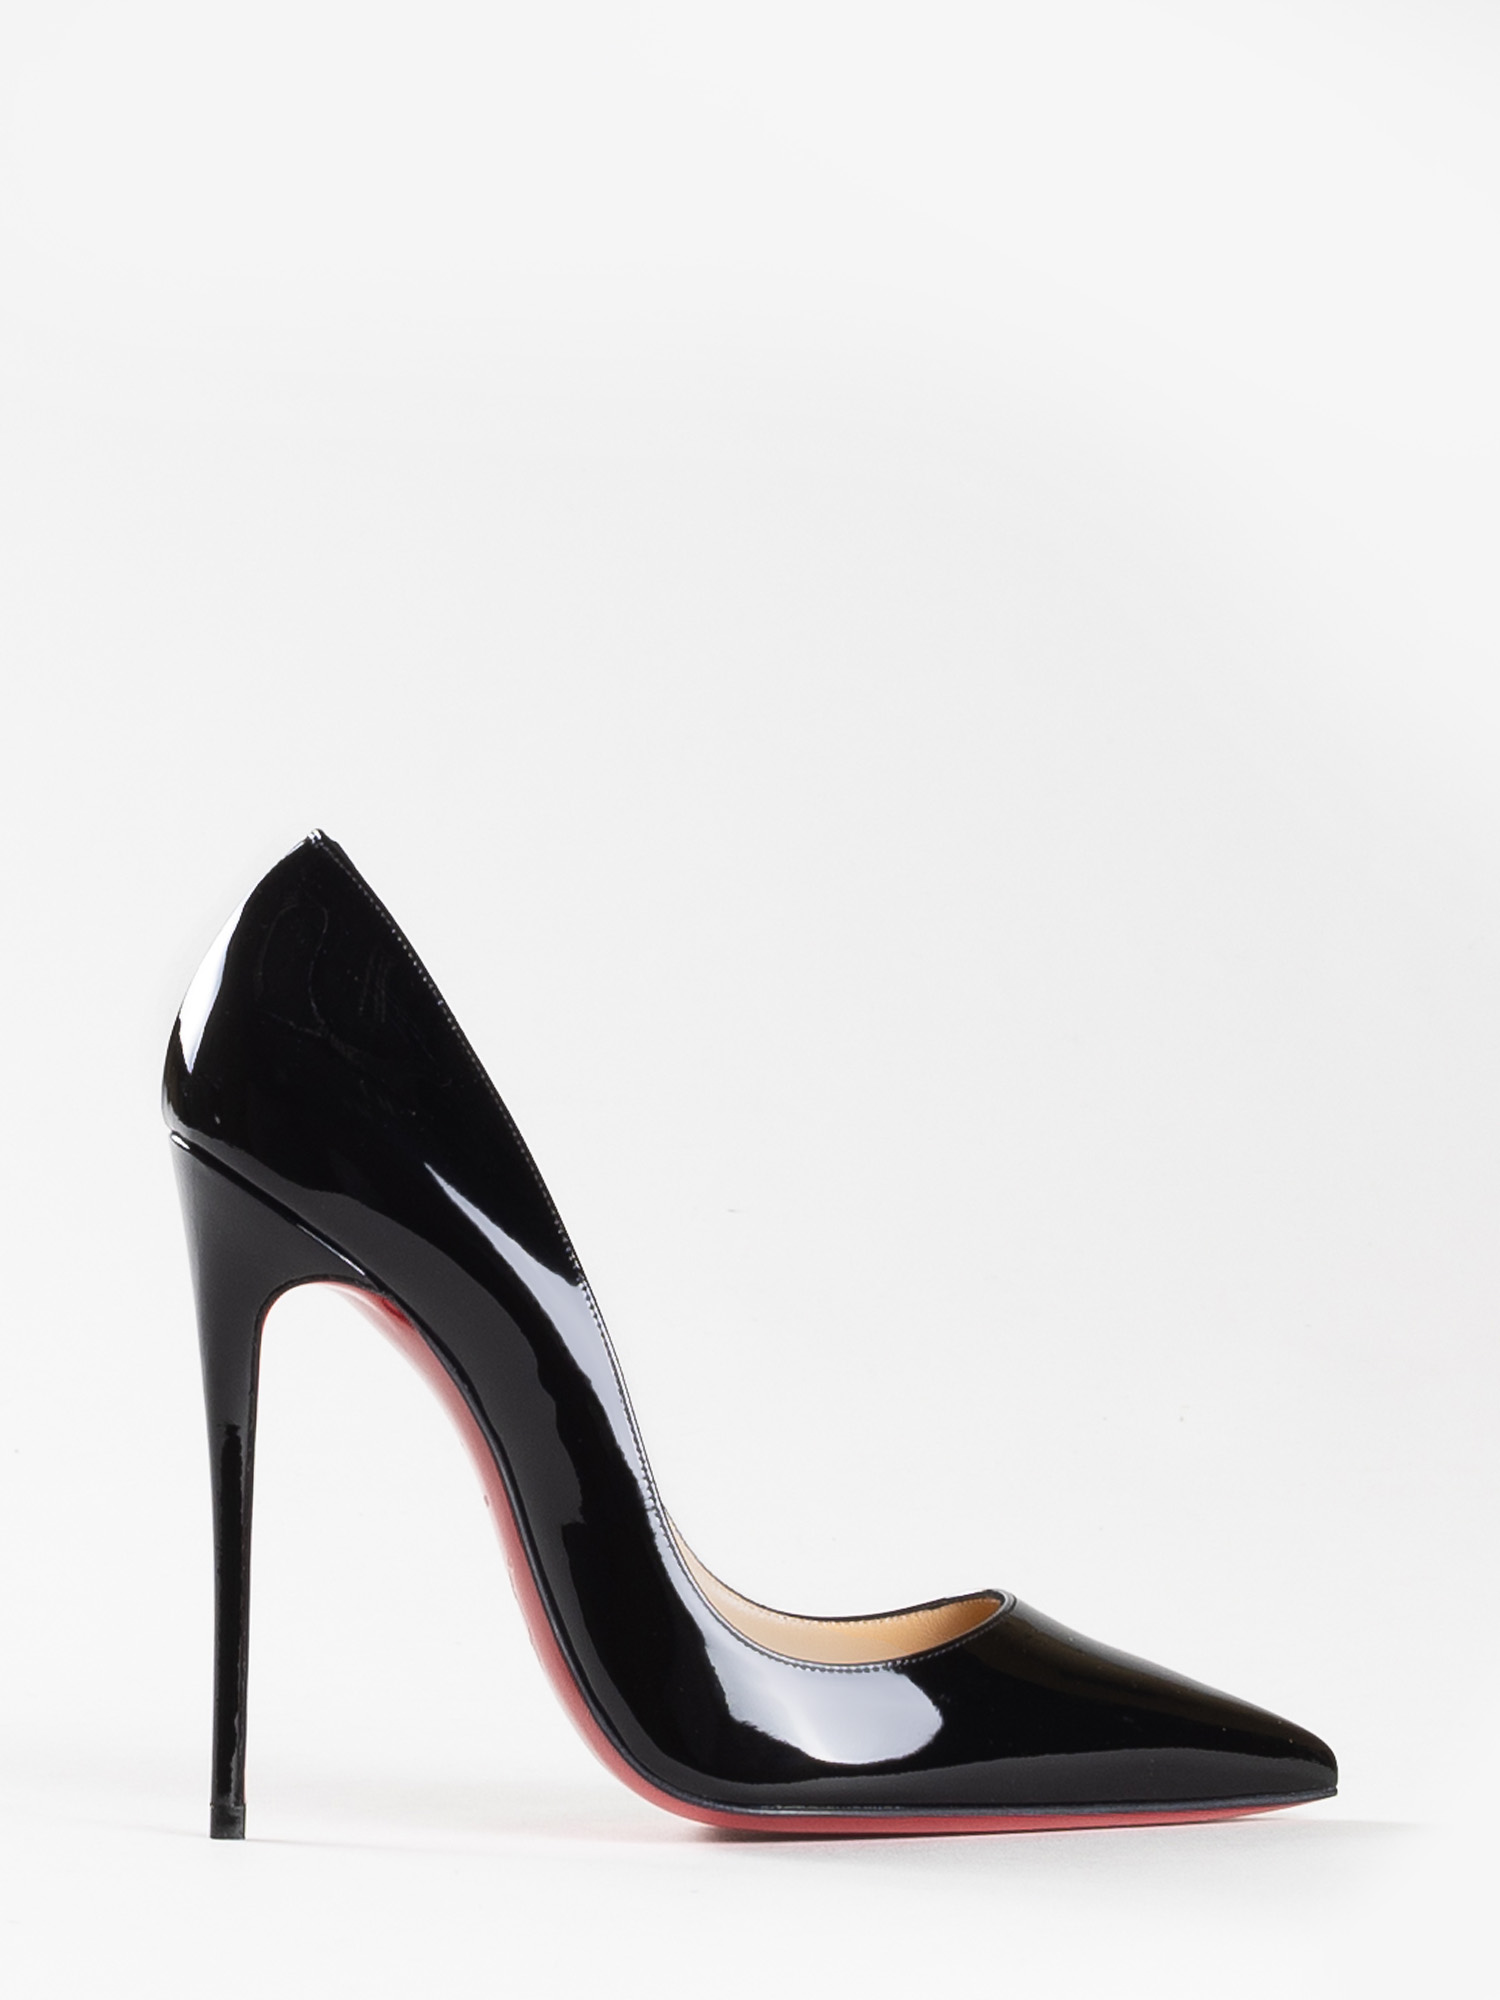 SO KATE PATENT LEATHER SHOES - CHRISTIAN LOUBOUTIN